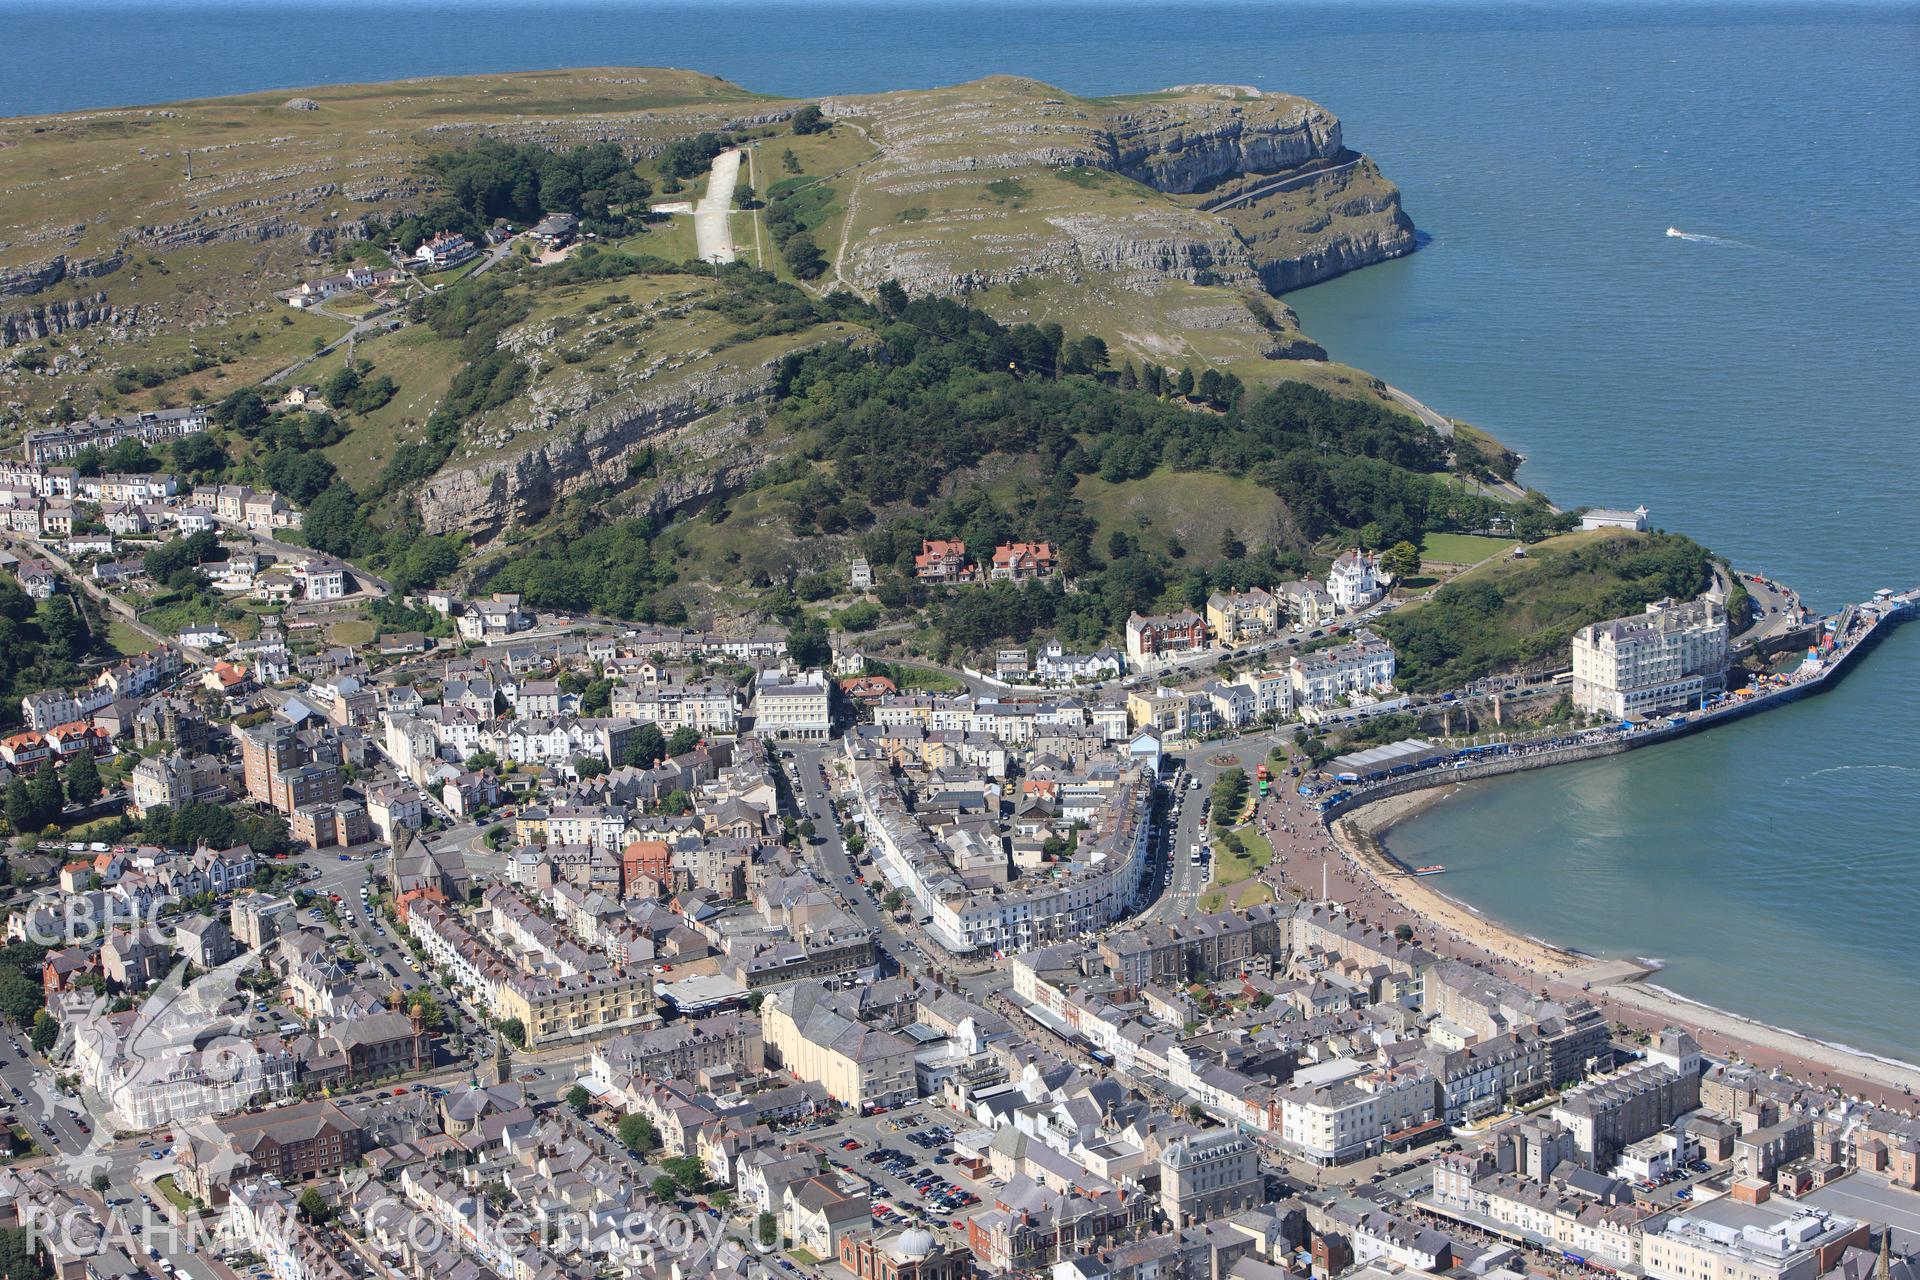 RCAHMW colour oblique photograph of Llandudno, town and sea front, from south. Taken by Toby Driver on 20/07/2011.